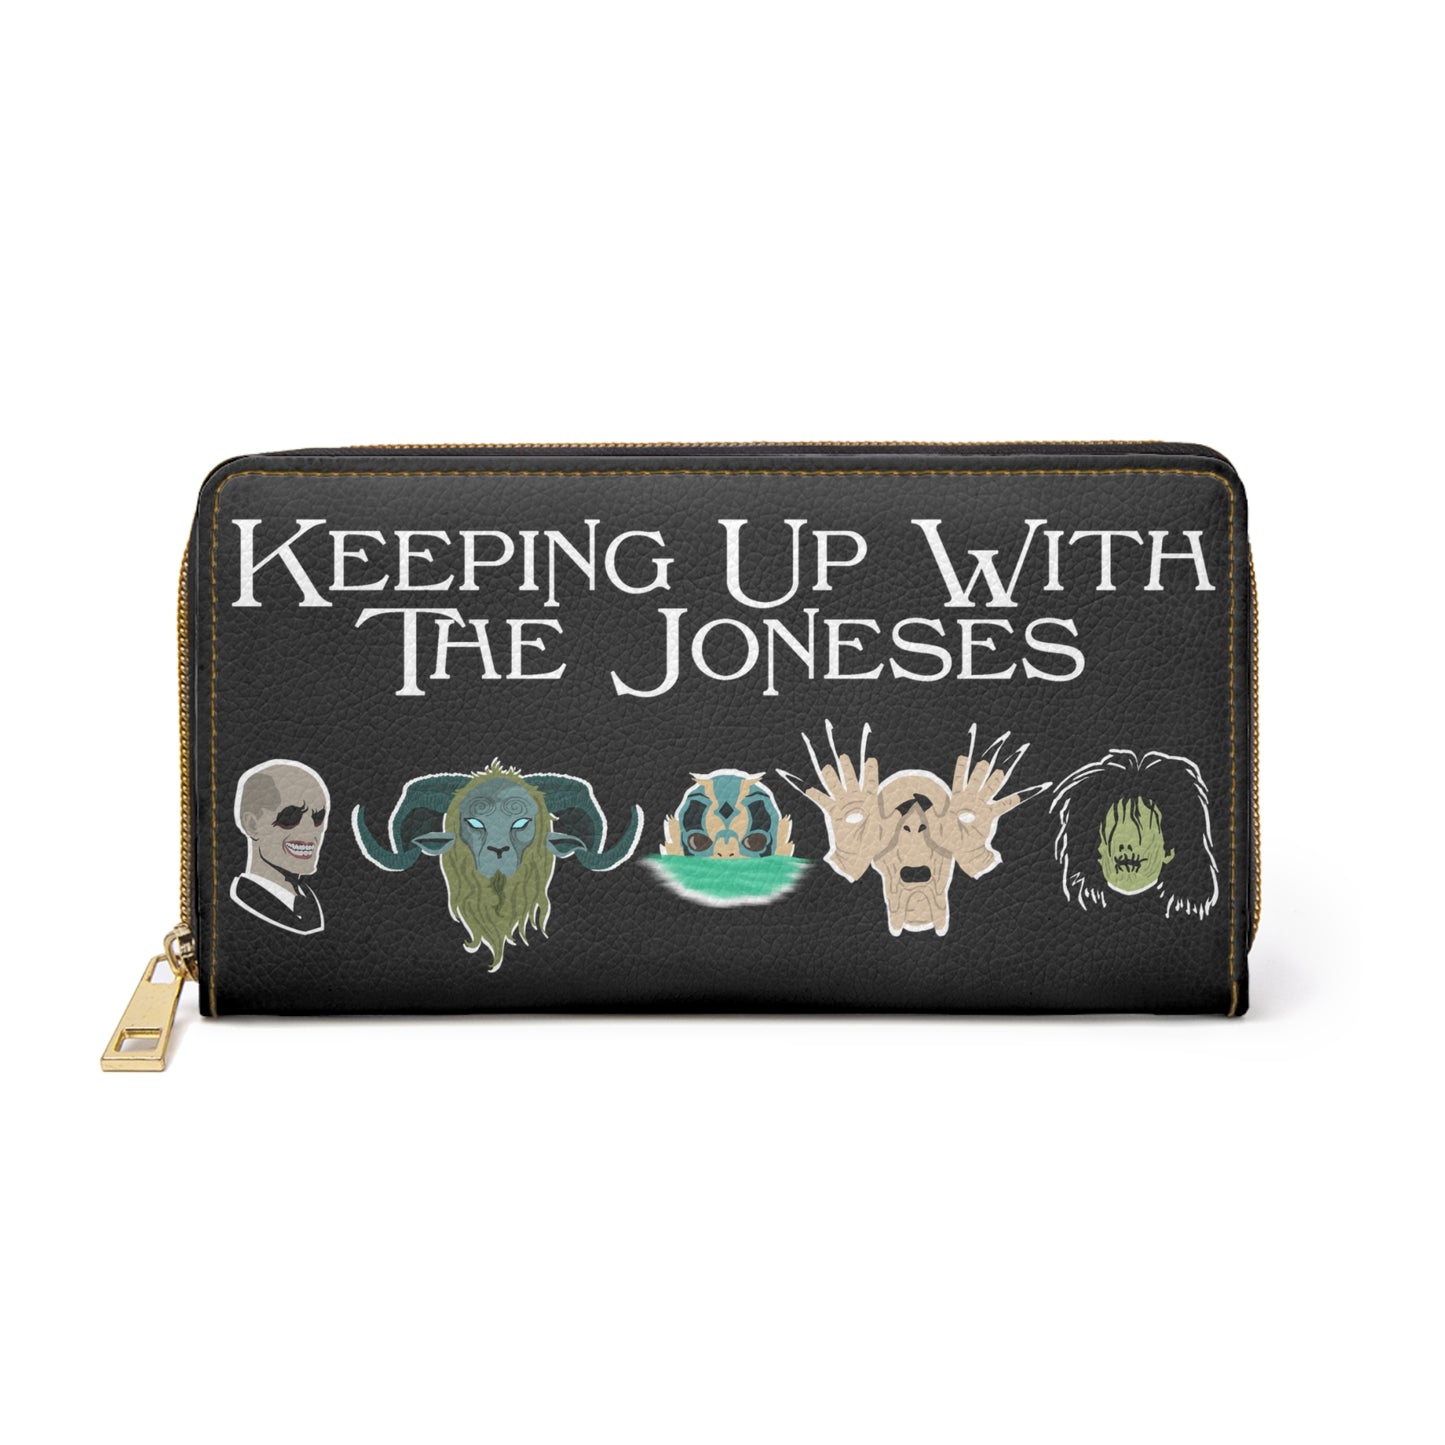 Keeping Up With The Joneses Zipper Wallet